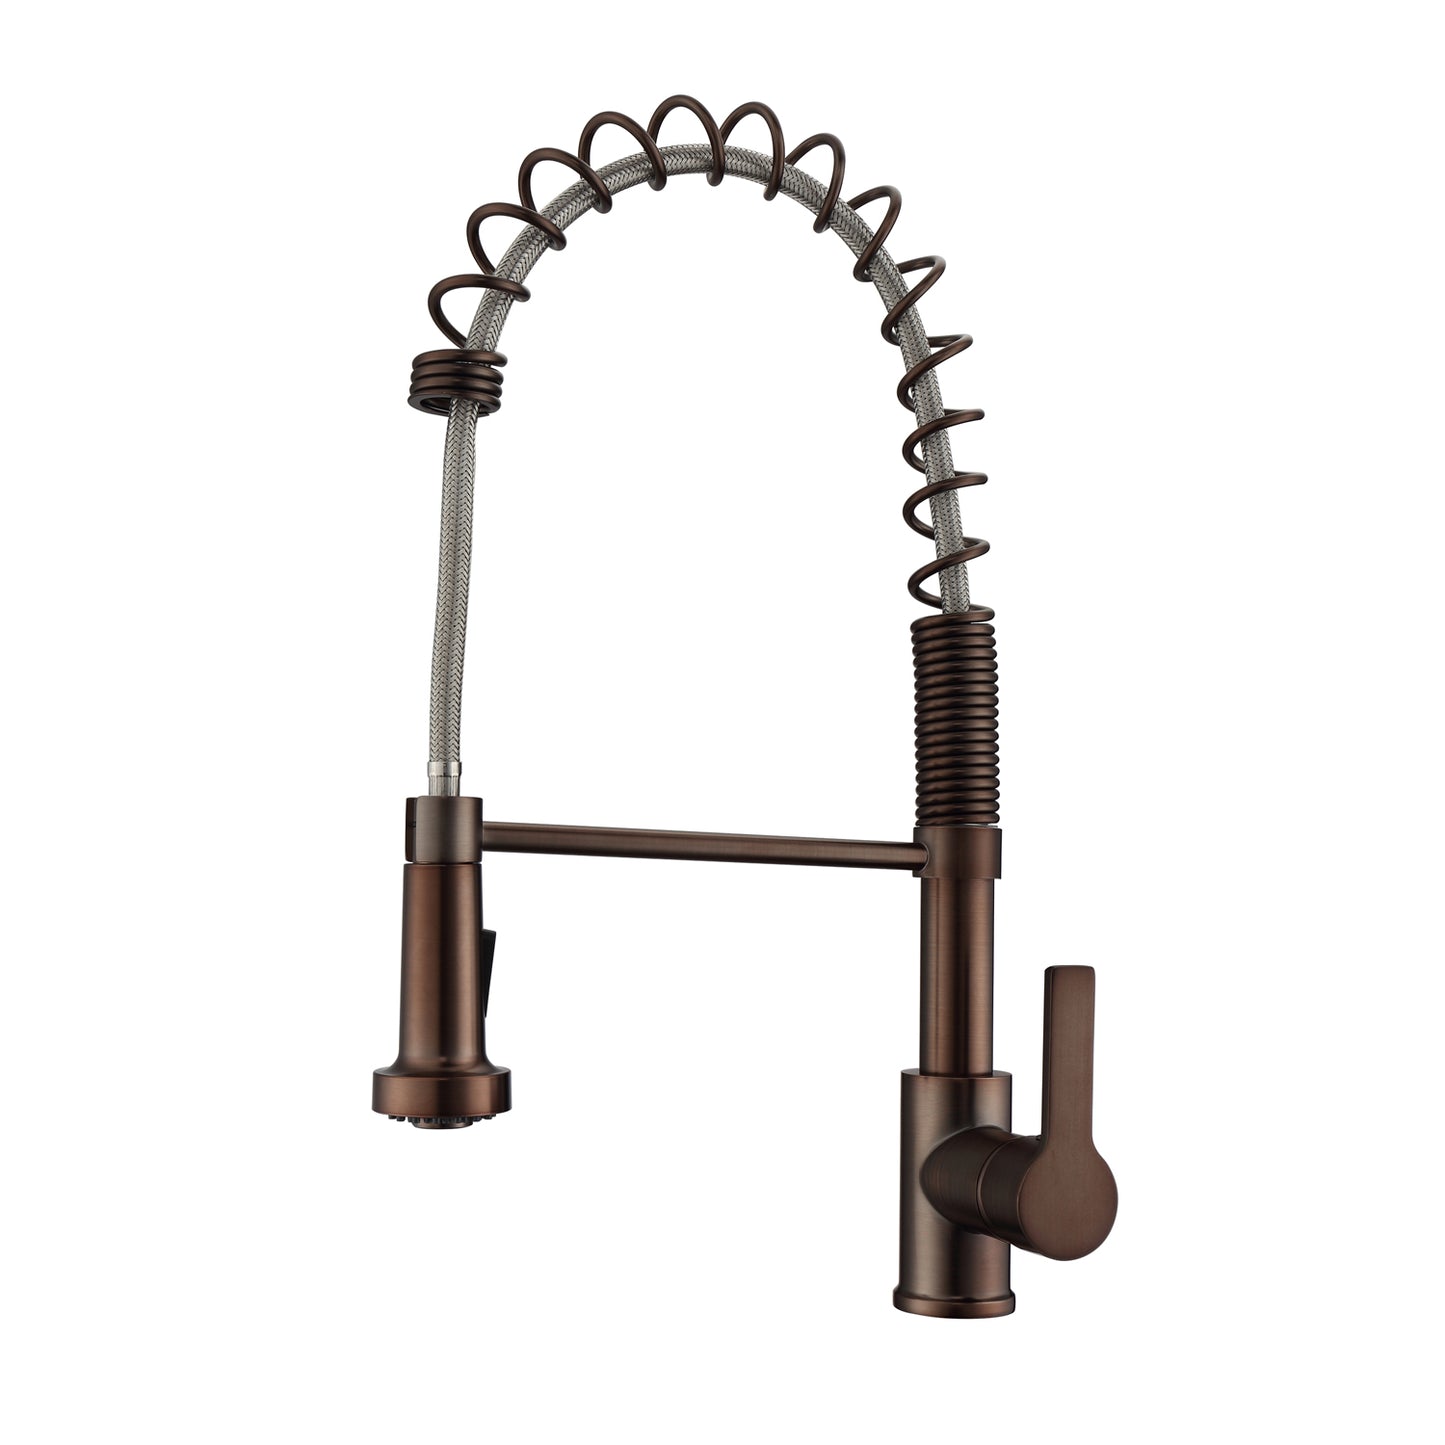 Niall 2 Kitchen Faucet, Spring, Pull-out Sprayer, Lever Handle, Oil Rubbed Bronze